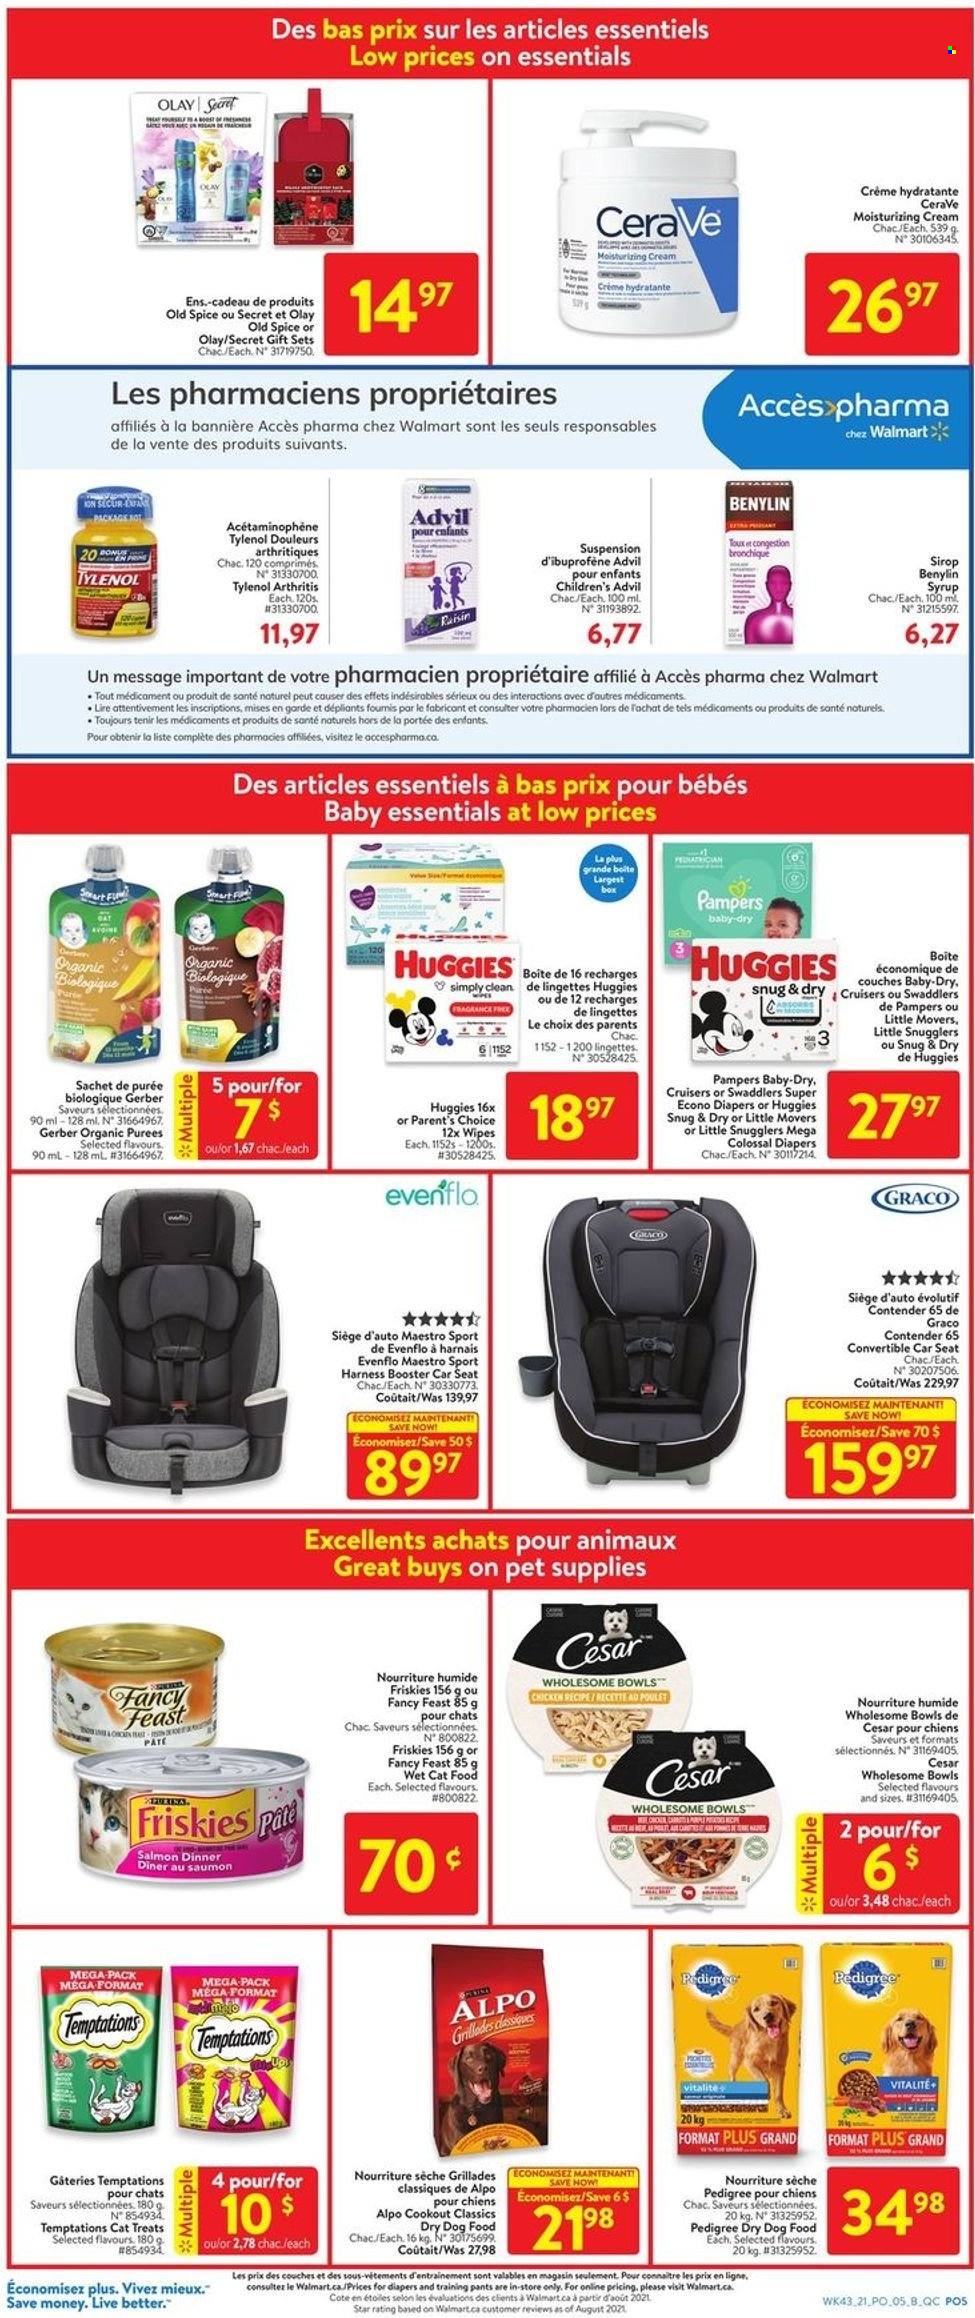 thumbnail - Walmart Flyer - November 18, 2021 - November 24, 2021 - Sales products - Gerber, spice, wipes, pants, nappies, baby pants, CeraVe, Olay, animal food, cat food, dog food, Pedigree, dry dog food, Fancy Feast, Friskies, Alpo, wet cat food, Snug, baby car seat, Tylenol, Advil Rapid, Benylin, Huggies, Pampers, Old Spice. Page 13.